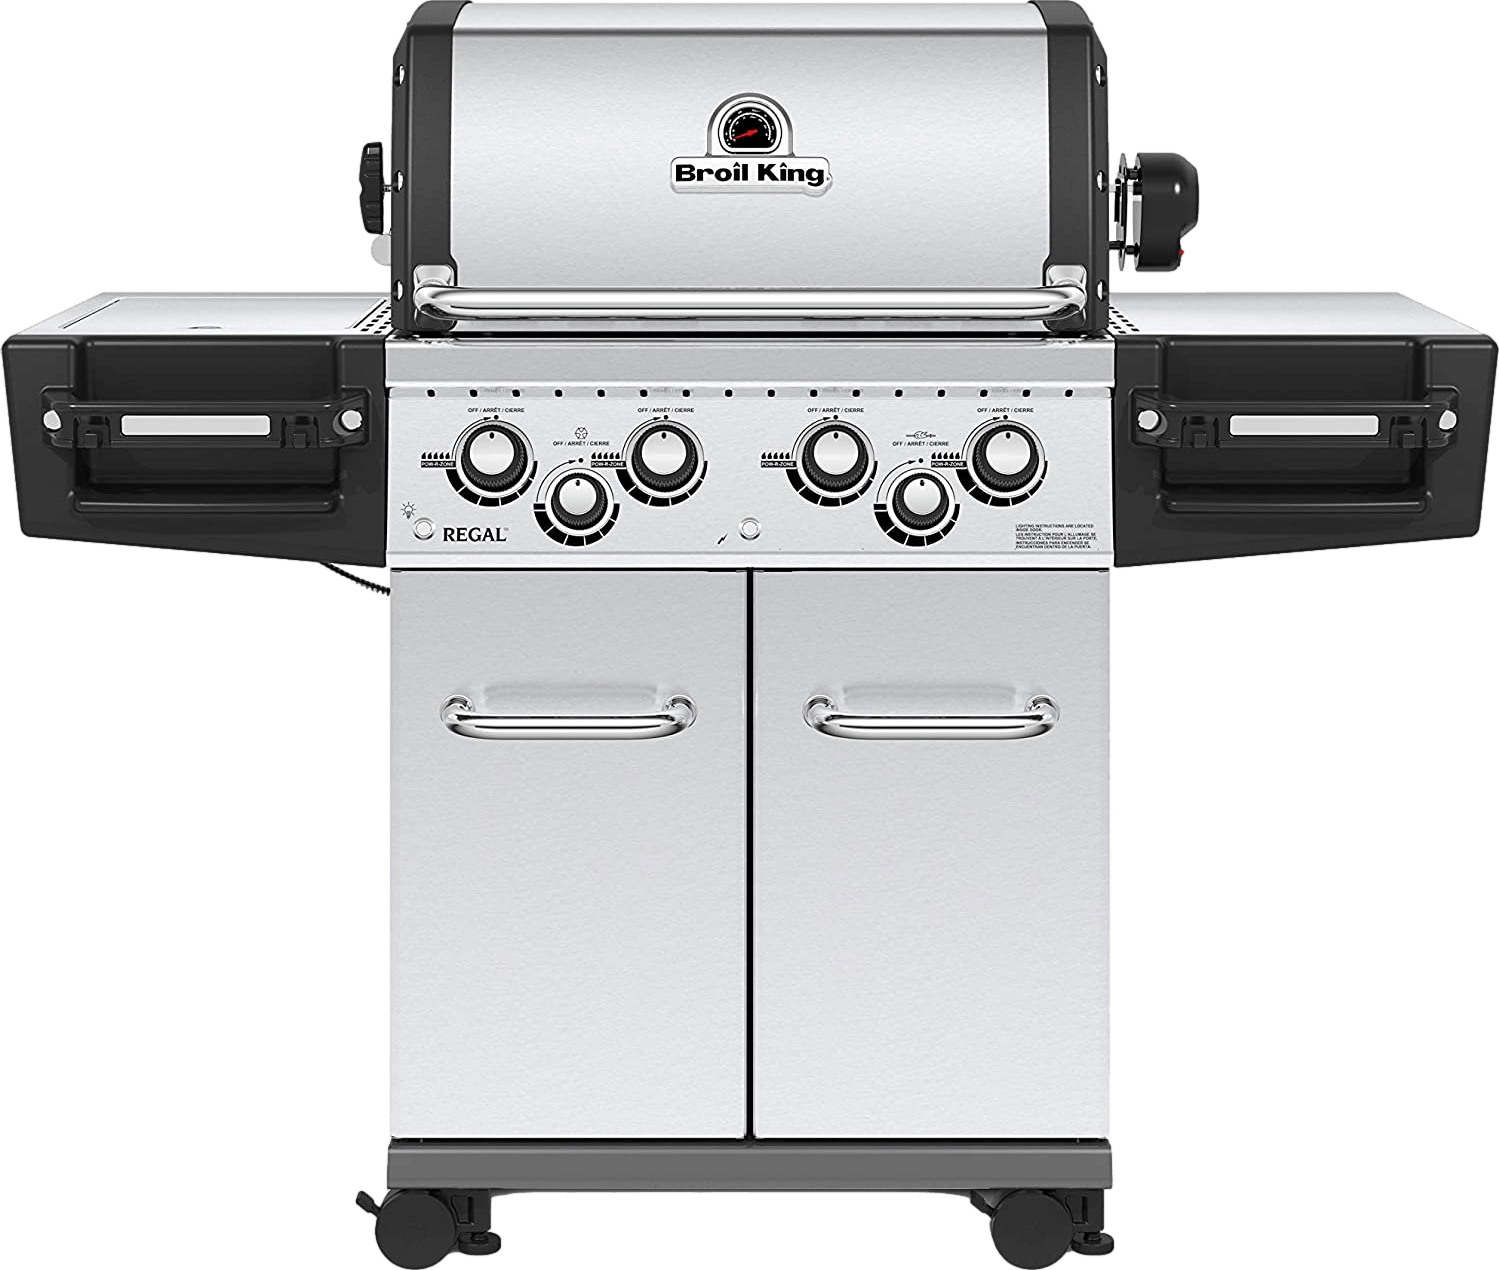 Broil King Regal S 490 Pro Infrared Gas Grill · Natural